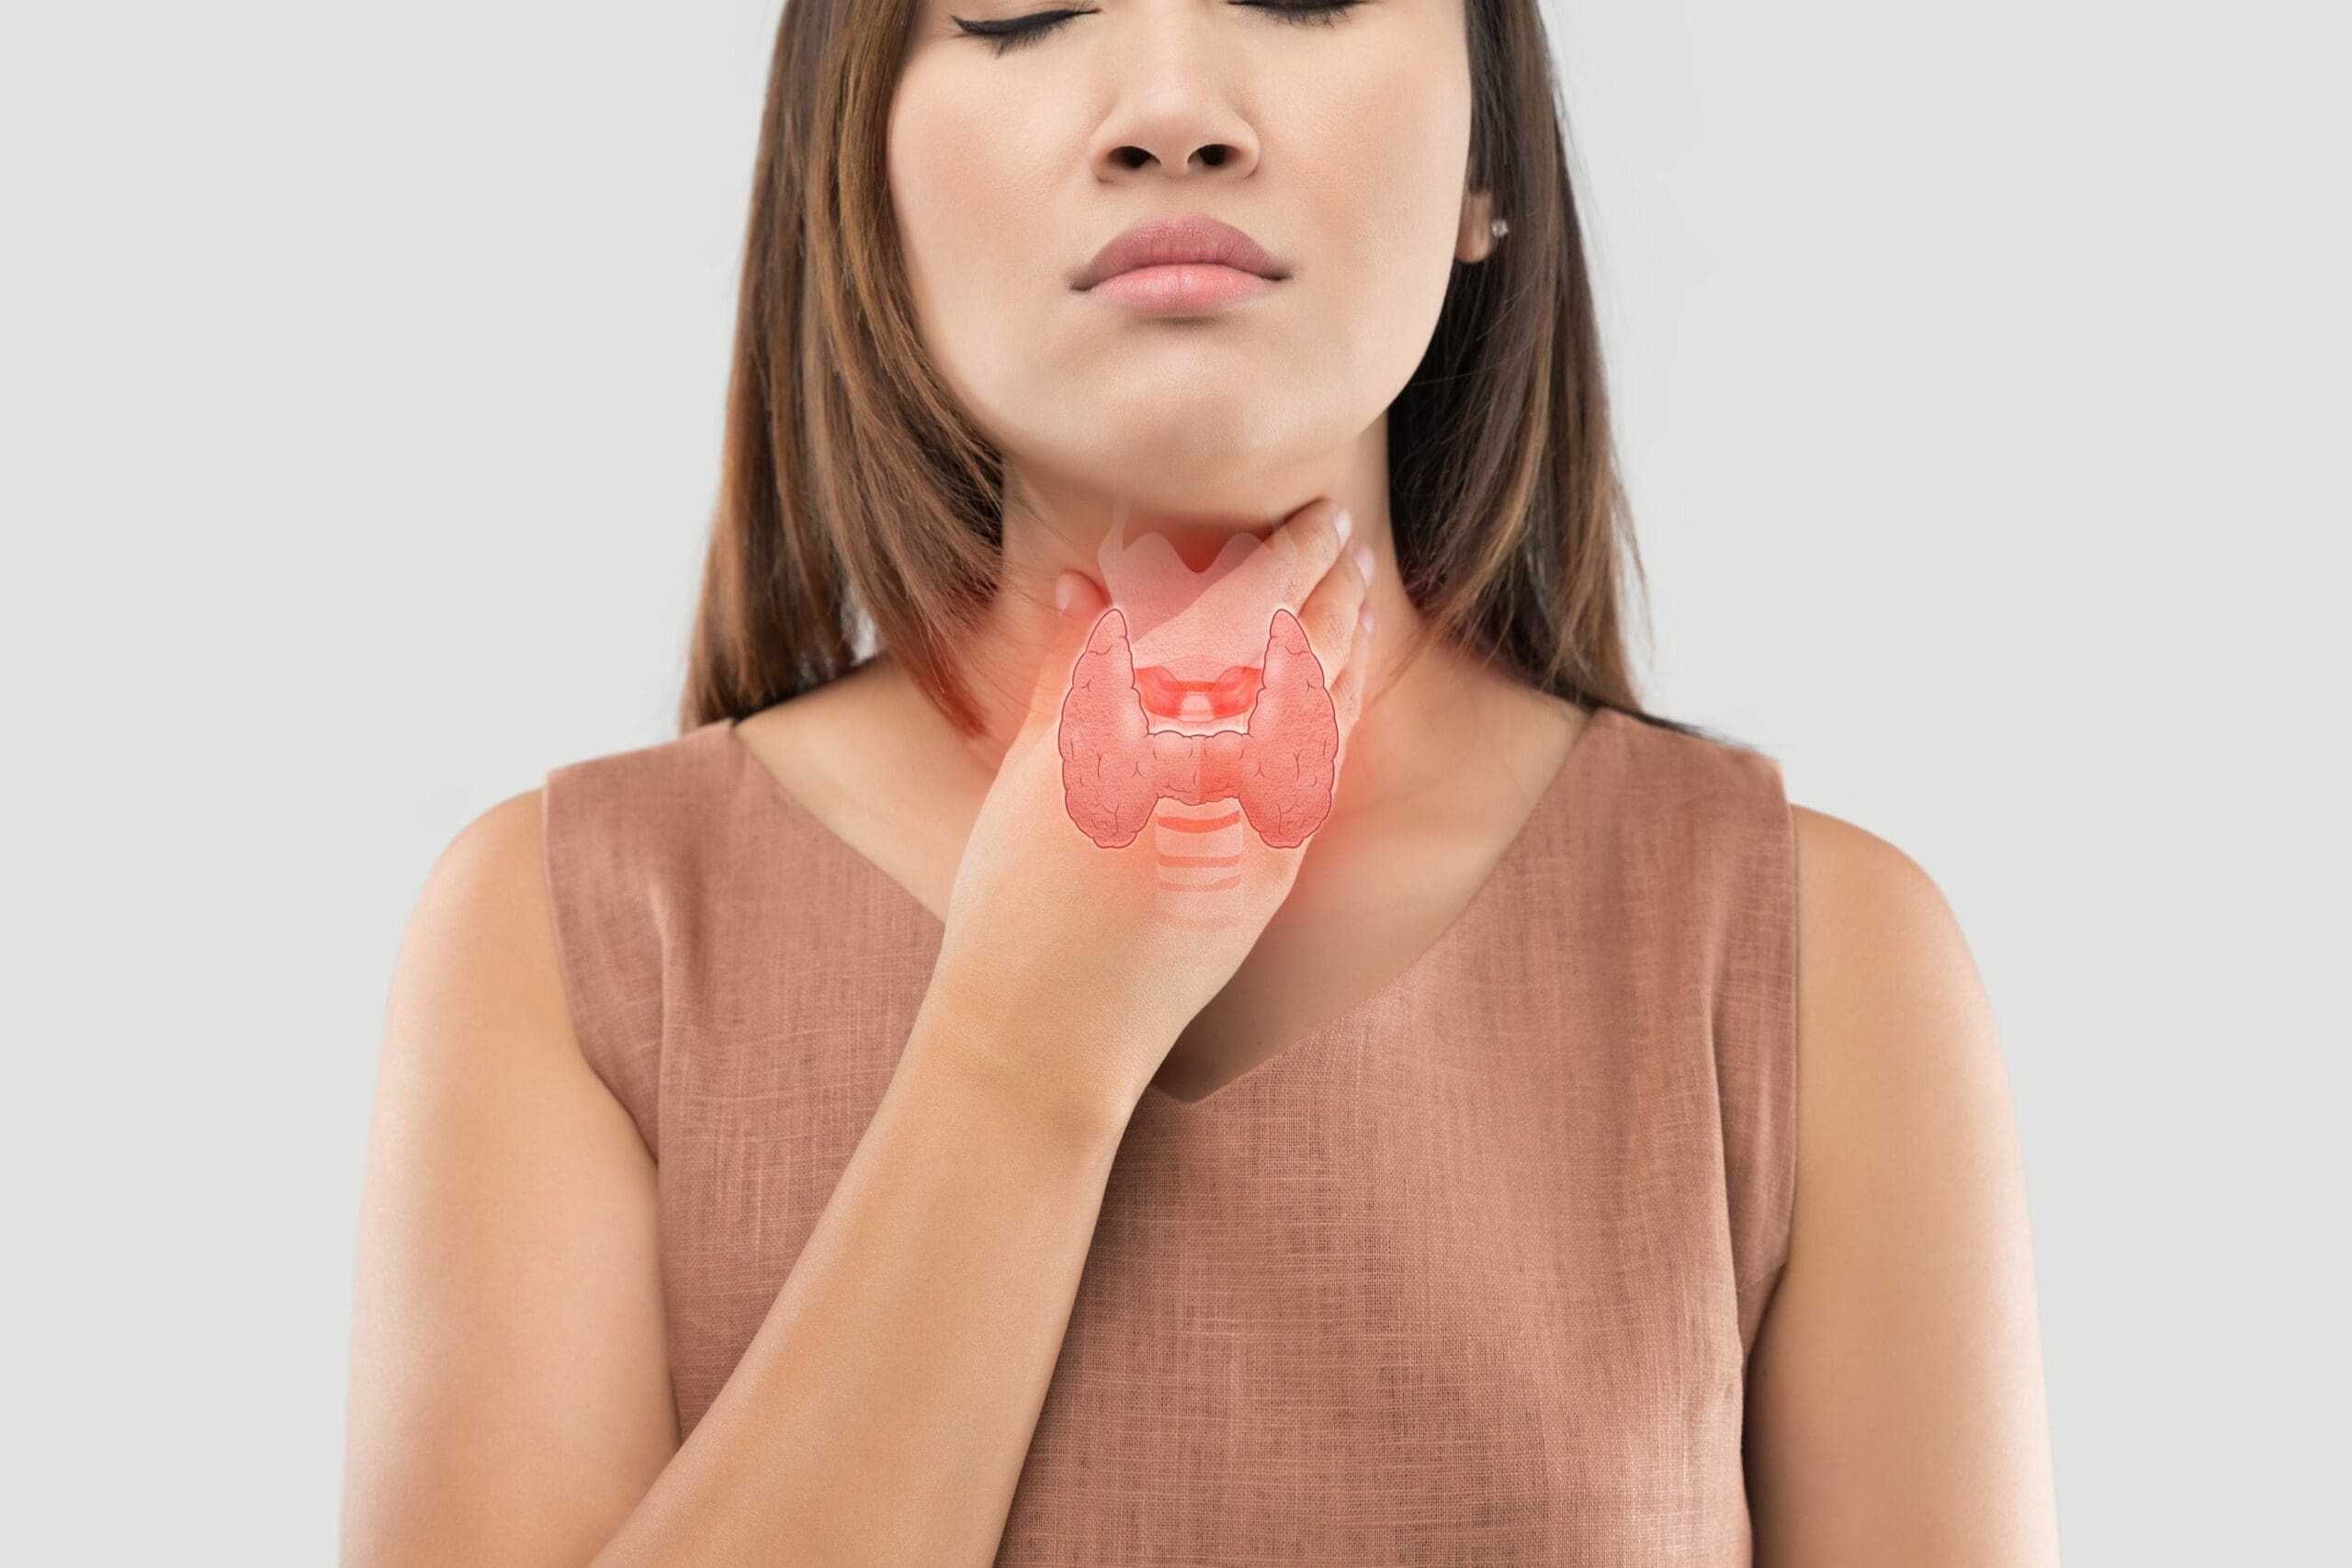 What is throat cancer?